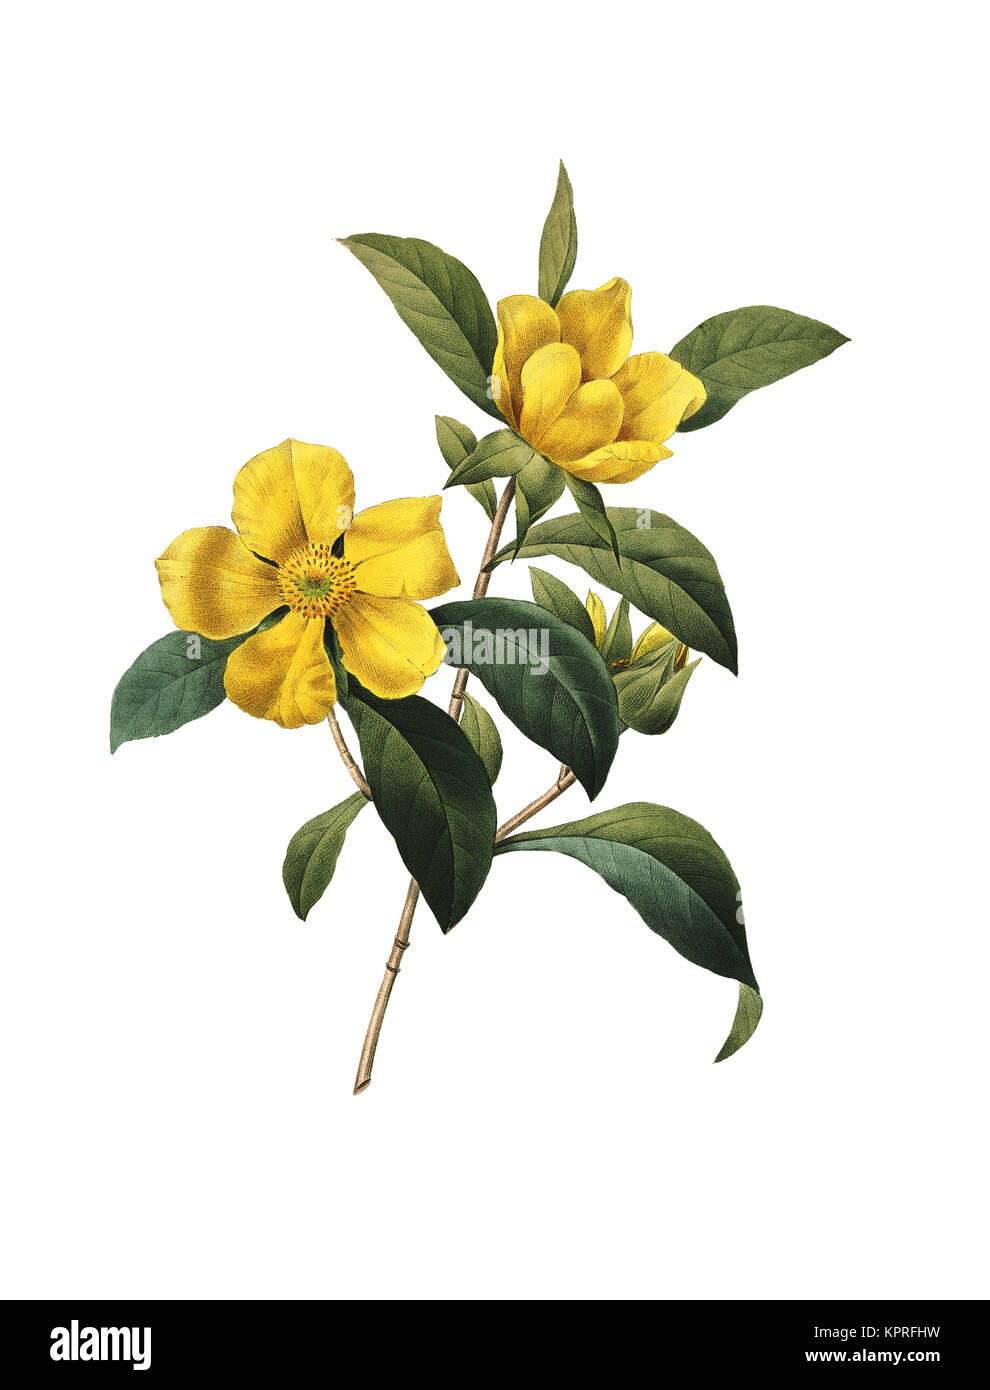 19th-century illustration of a Hibbertia scandens (also known as Snake Vine, Climbing Guinea Flower or Golden Guinea Vine). Engraving by Pierre-Joseph Stock Photo